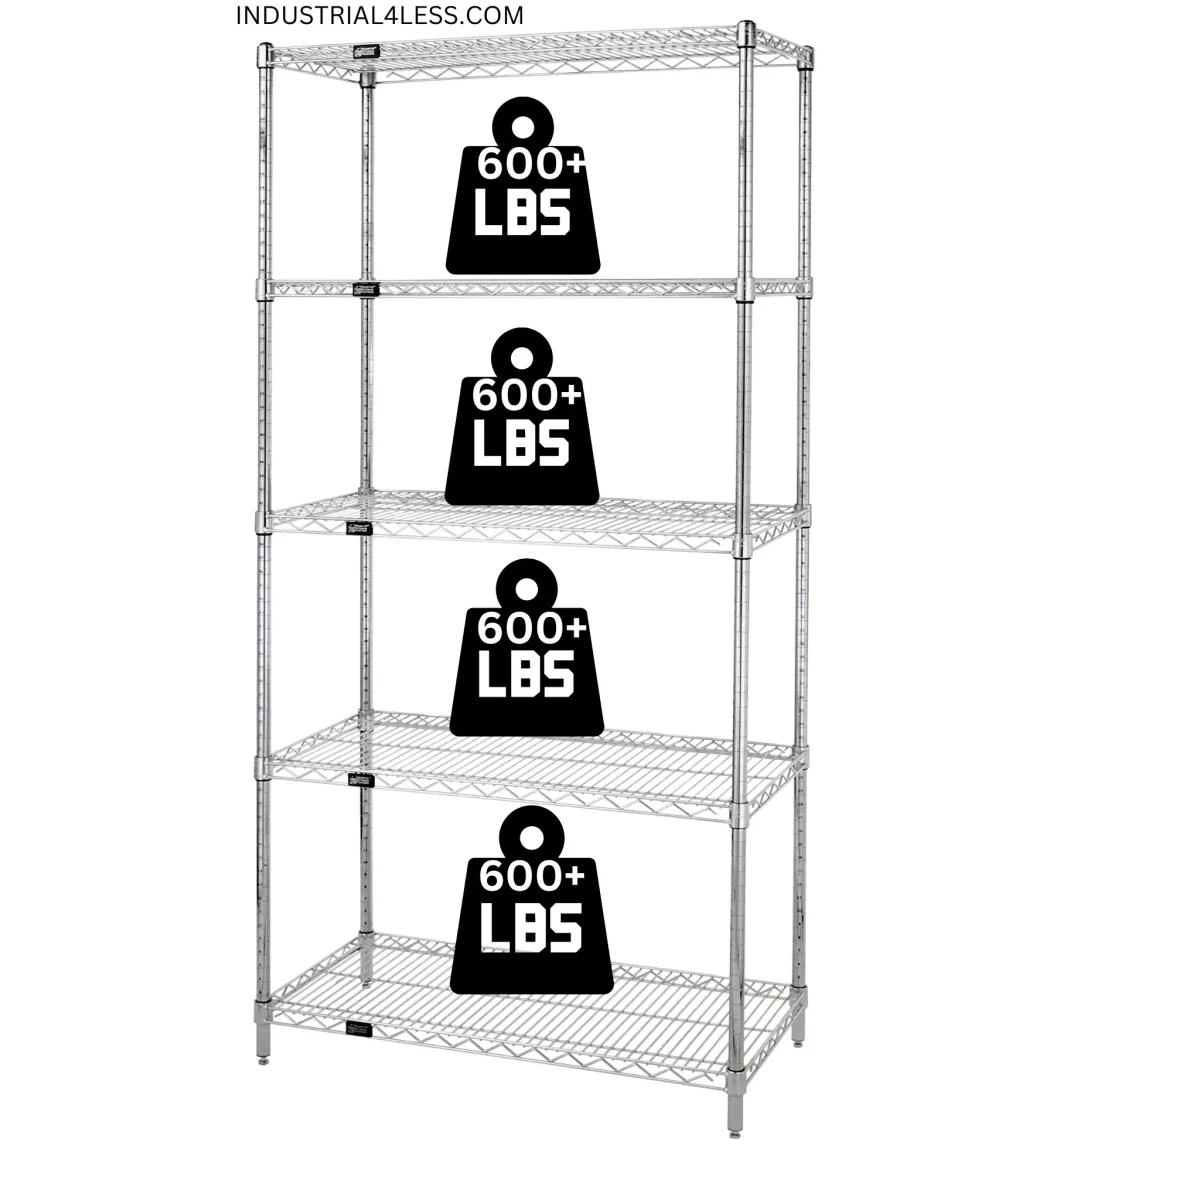 30" x 48" Stainless Steel Wire Shelving Unit - Industrial 4 Less - 30485S-5